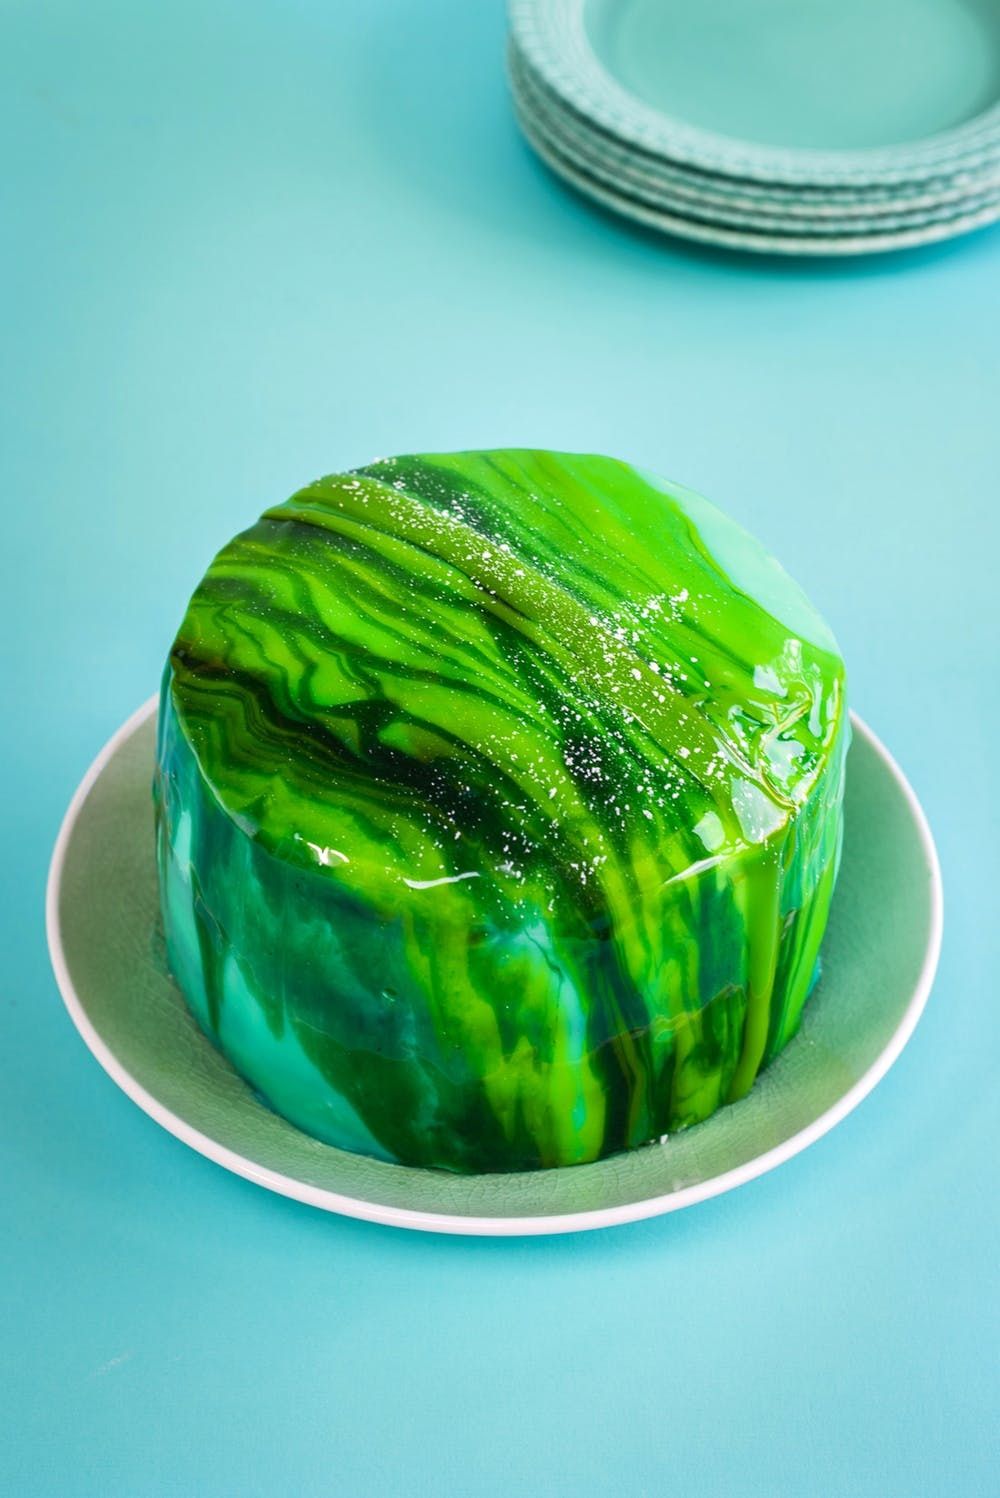 Mirror Glaze Cake with Easy White Chocolate Mousse - My Food and Family